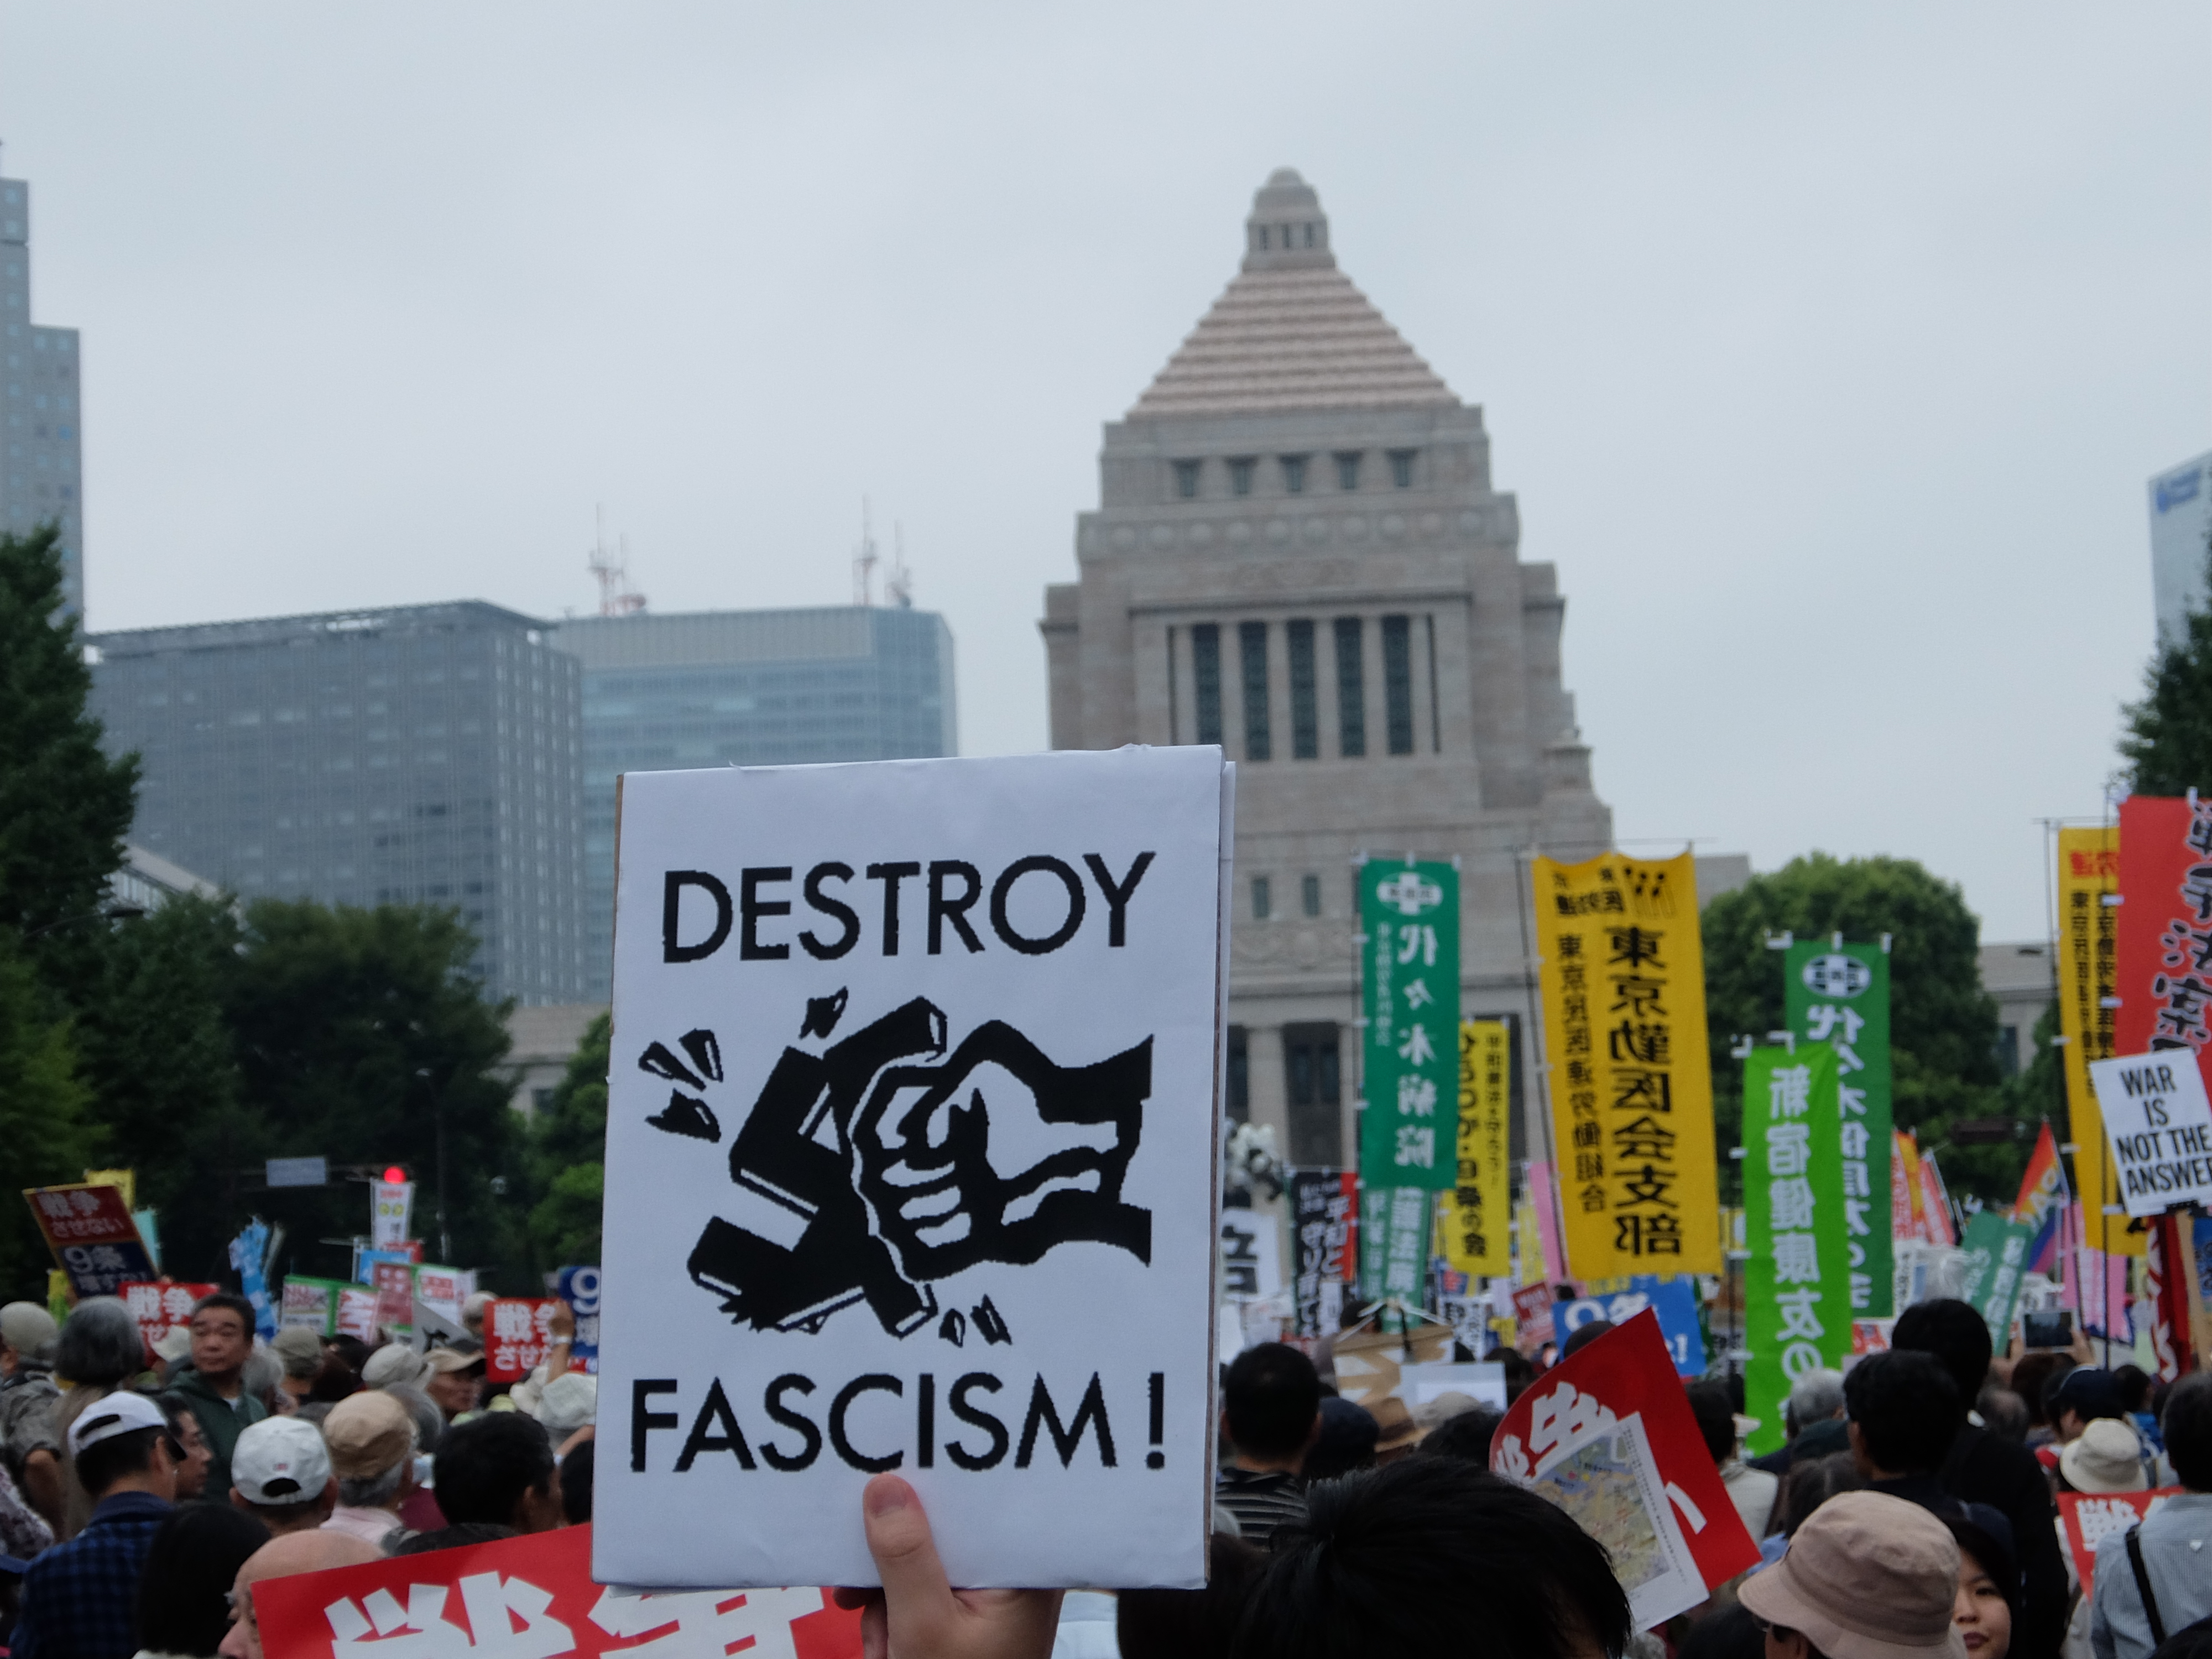 Youth against fascism: A protester holds up a sign during a demonstration in front of the Diet building in Tokyo on Aug. 30. | JEFF KINGSTON